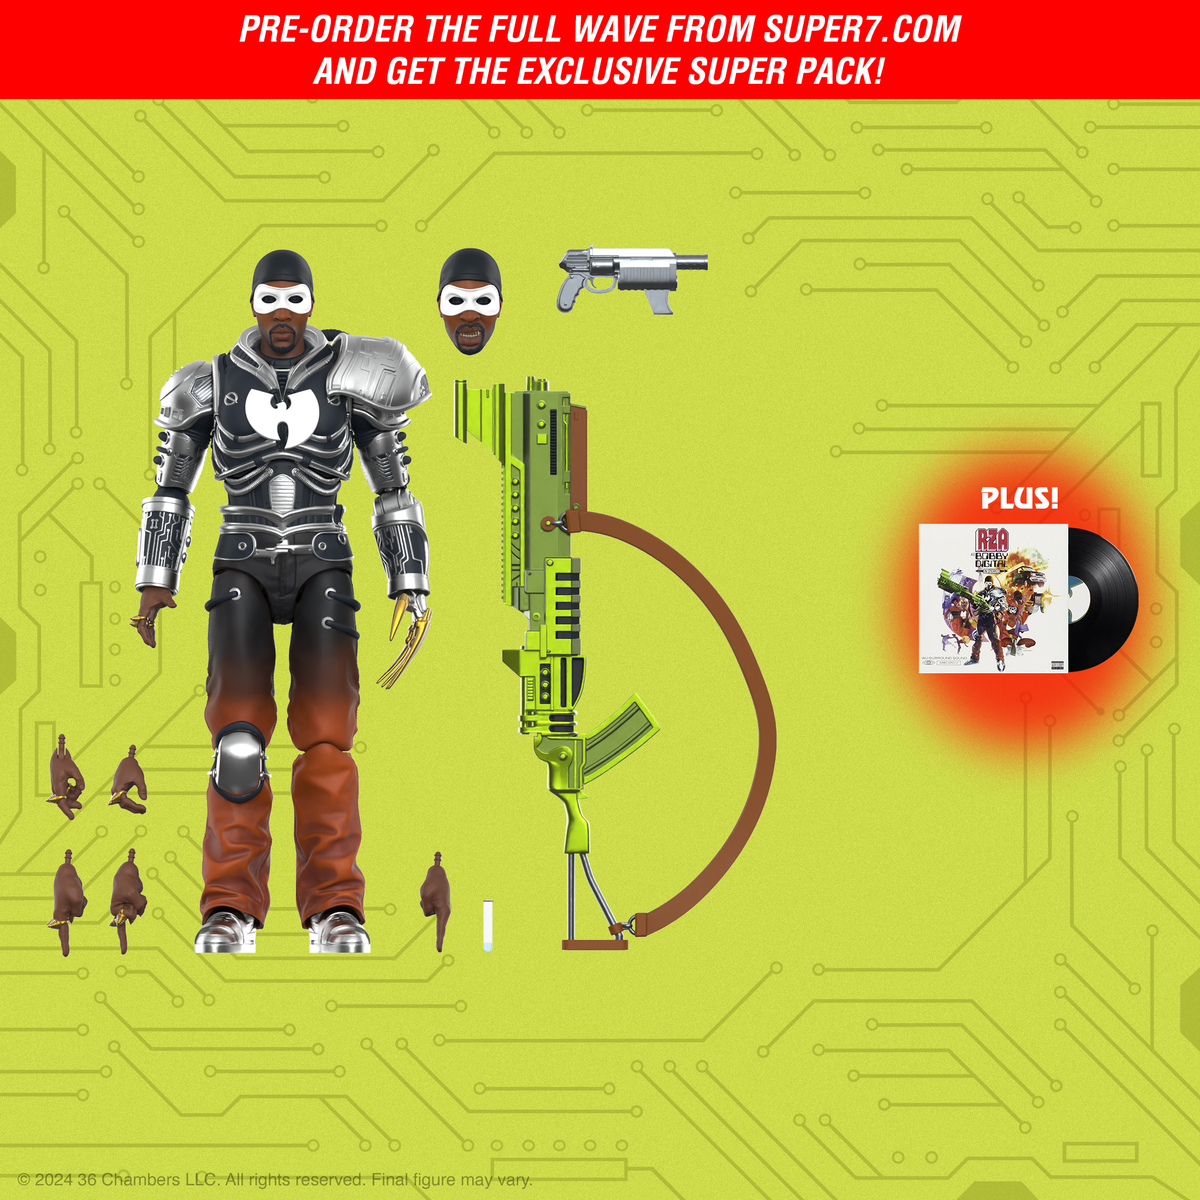 This RZA ULTIMATES! figure of Bobby Digital is inspired by the cover art from that album and features the iconic wordsmith in metallic cybernetic armor. This figure also comes with multiple accessories. Pre-order now: bit.ly/3QGNOUU #Super7 @RZA